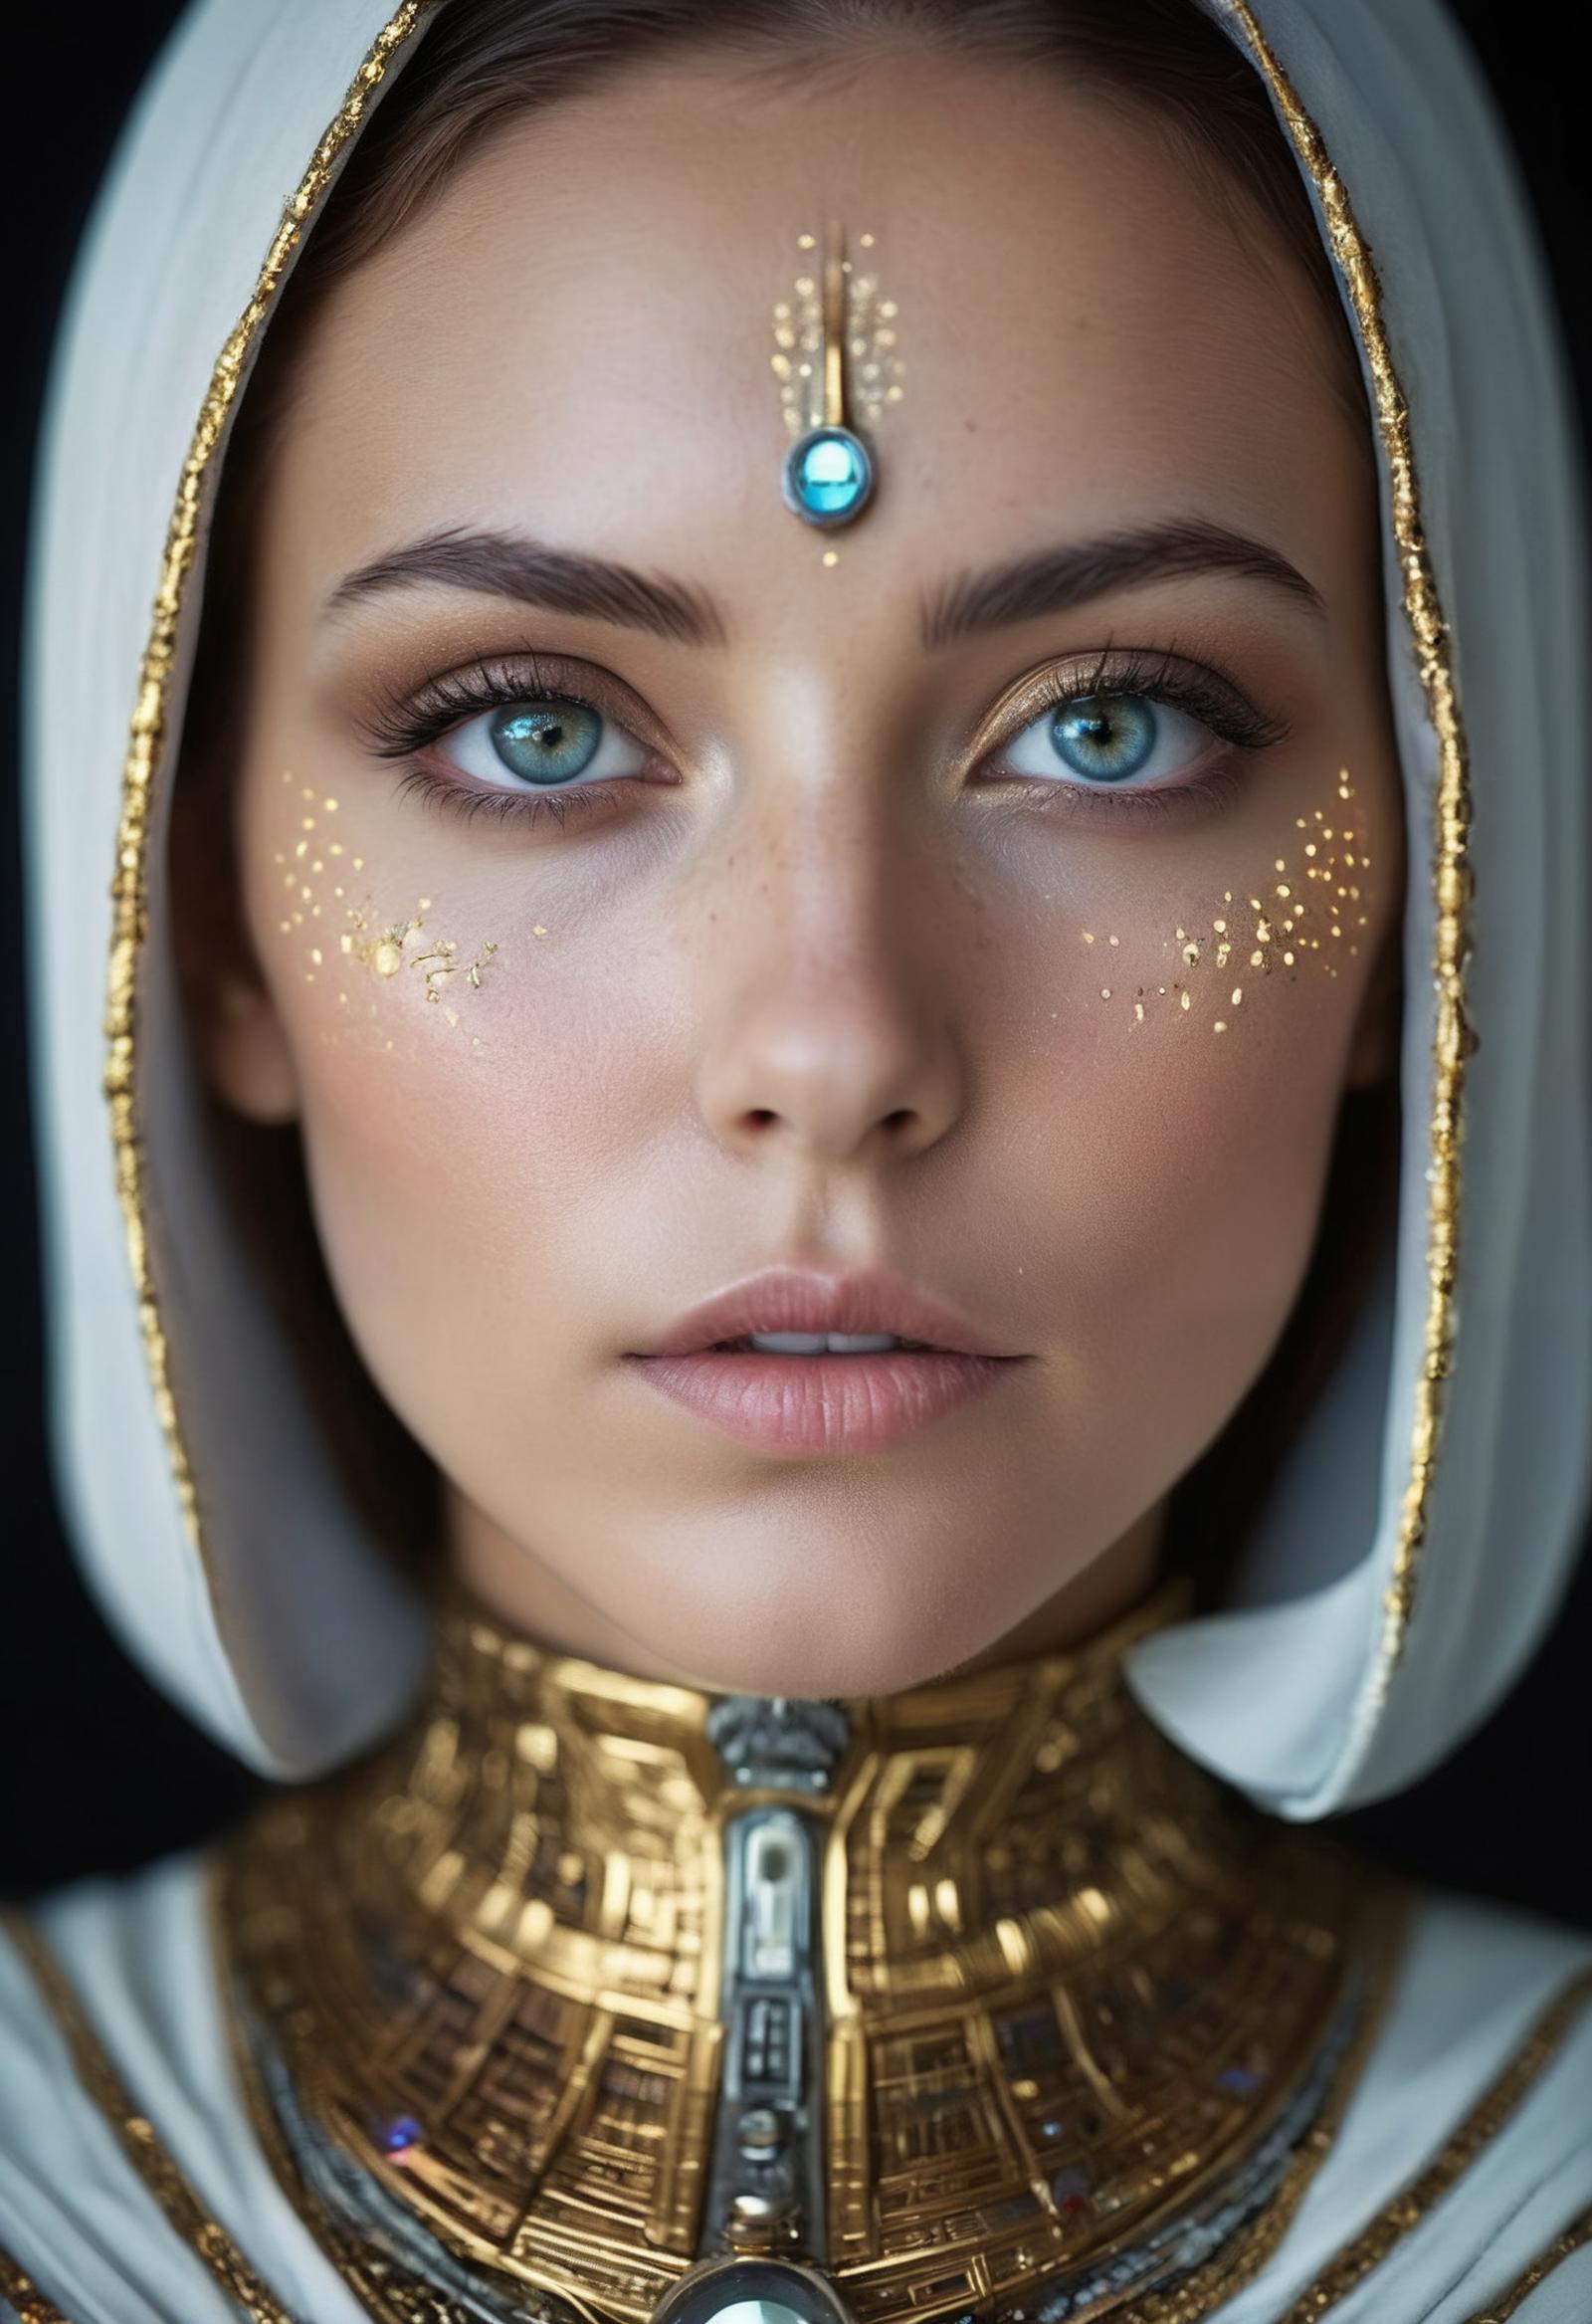 A woman with blue eyes and golden makeup on her face.